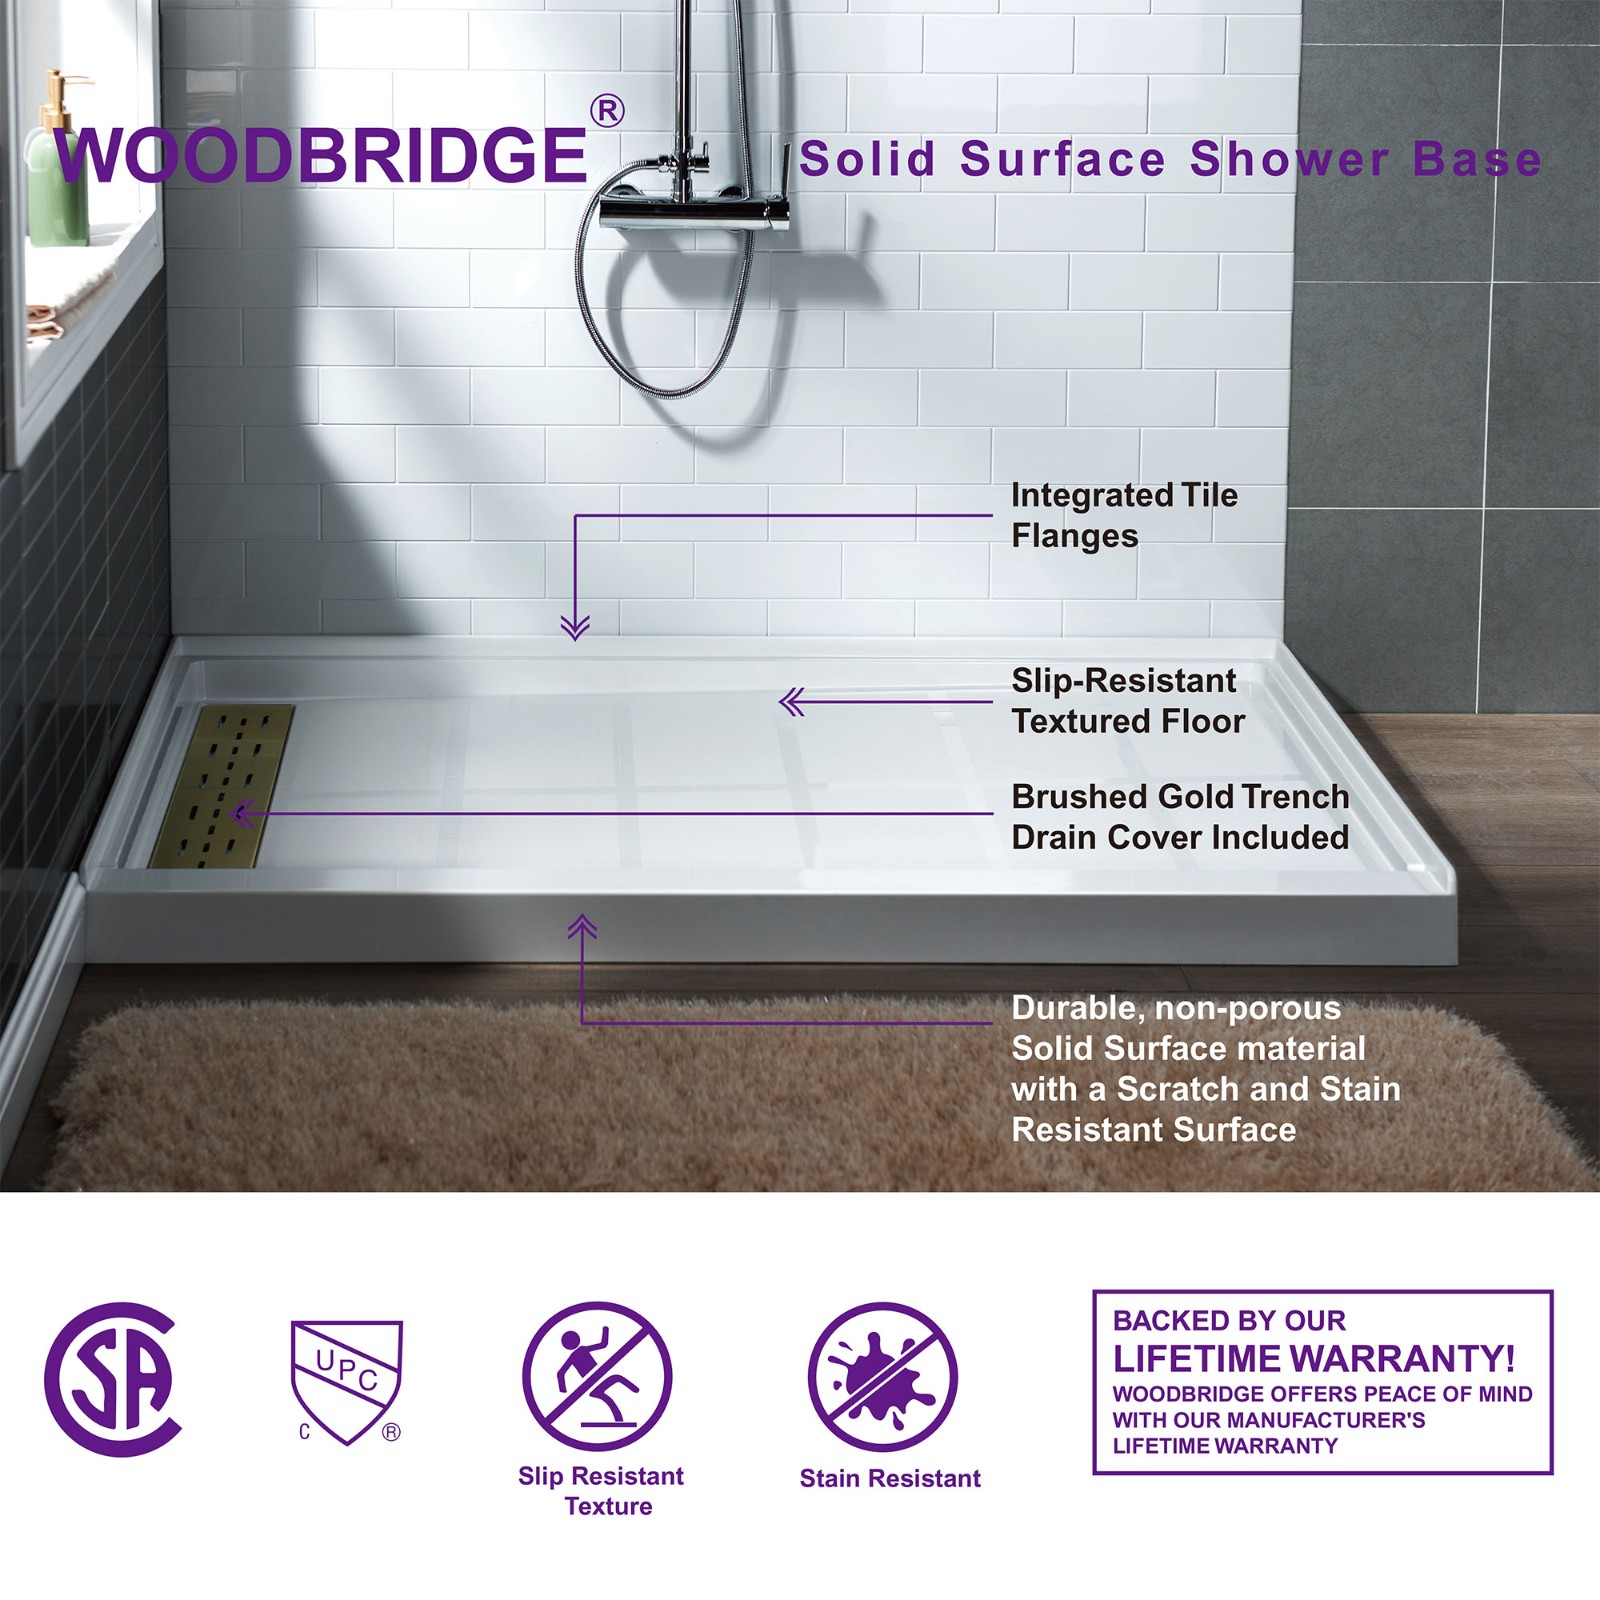  WOODBRIDGE SBR6034-1000L-BG SolidSurface Shower Base with Recessed Trench Side Including Brushed Gold Linear Cover, 60